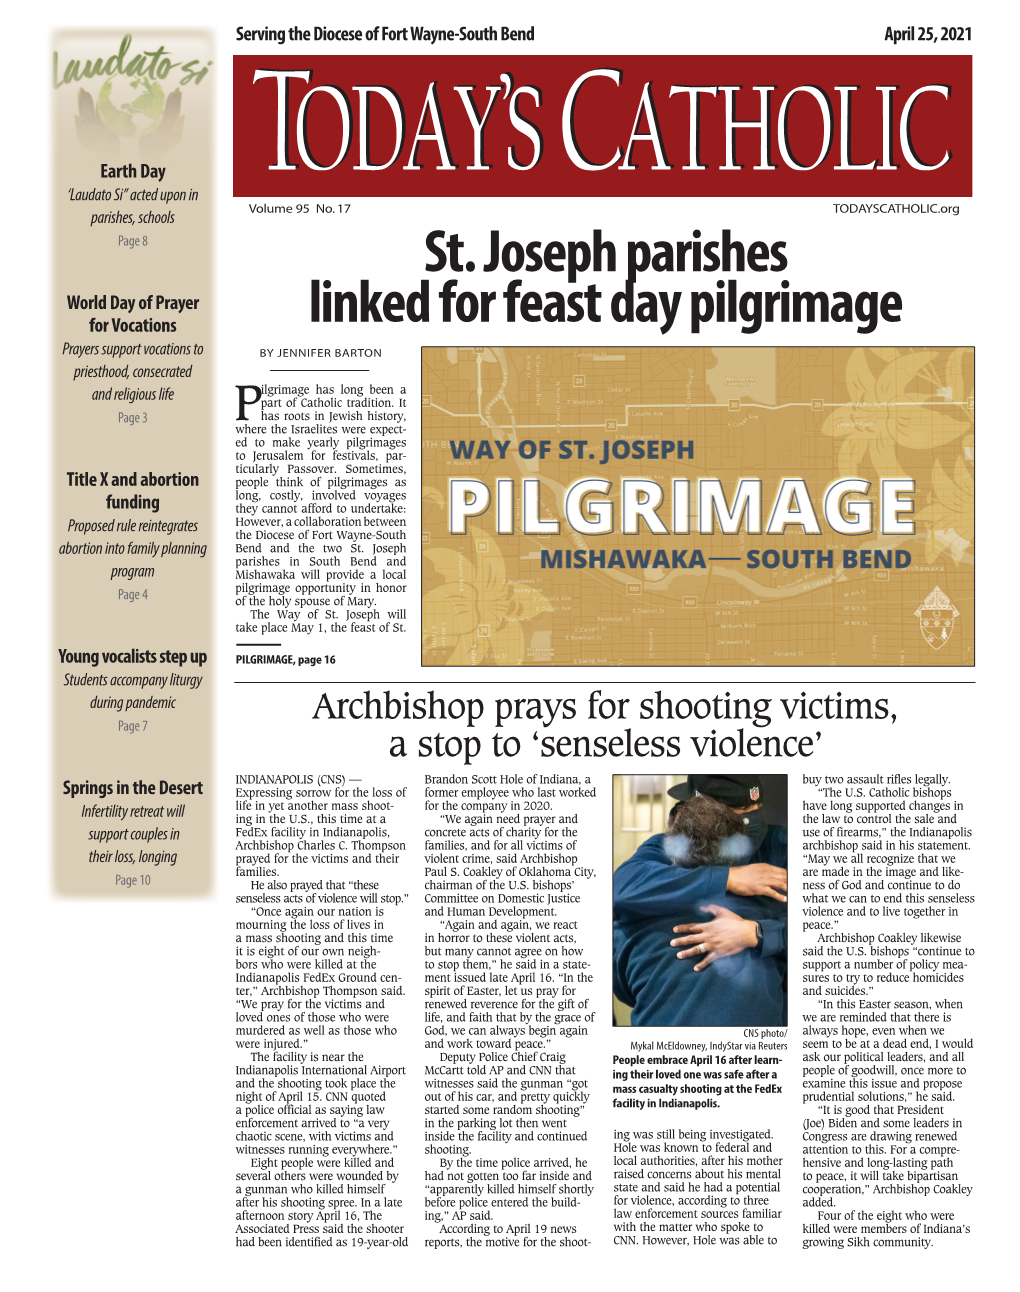 St. Joseph Parishes Linked for Feast Day Pilgrimage